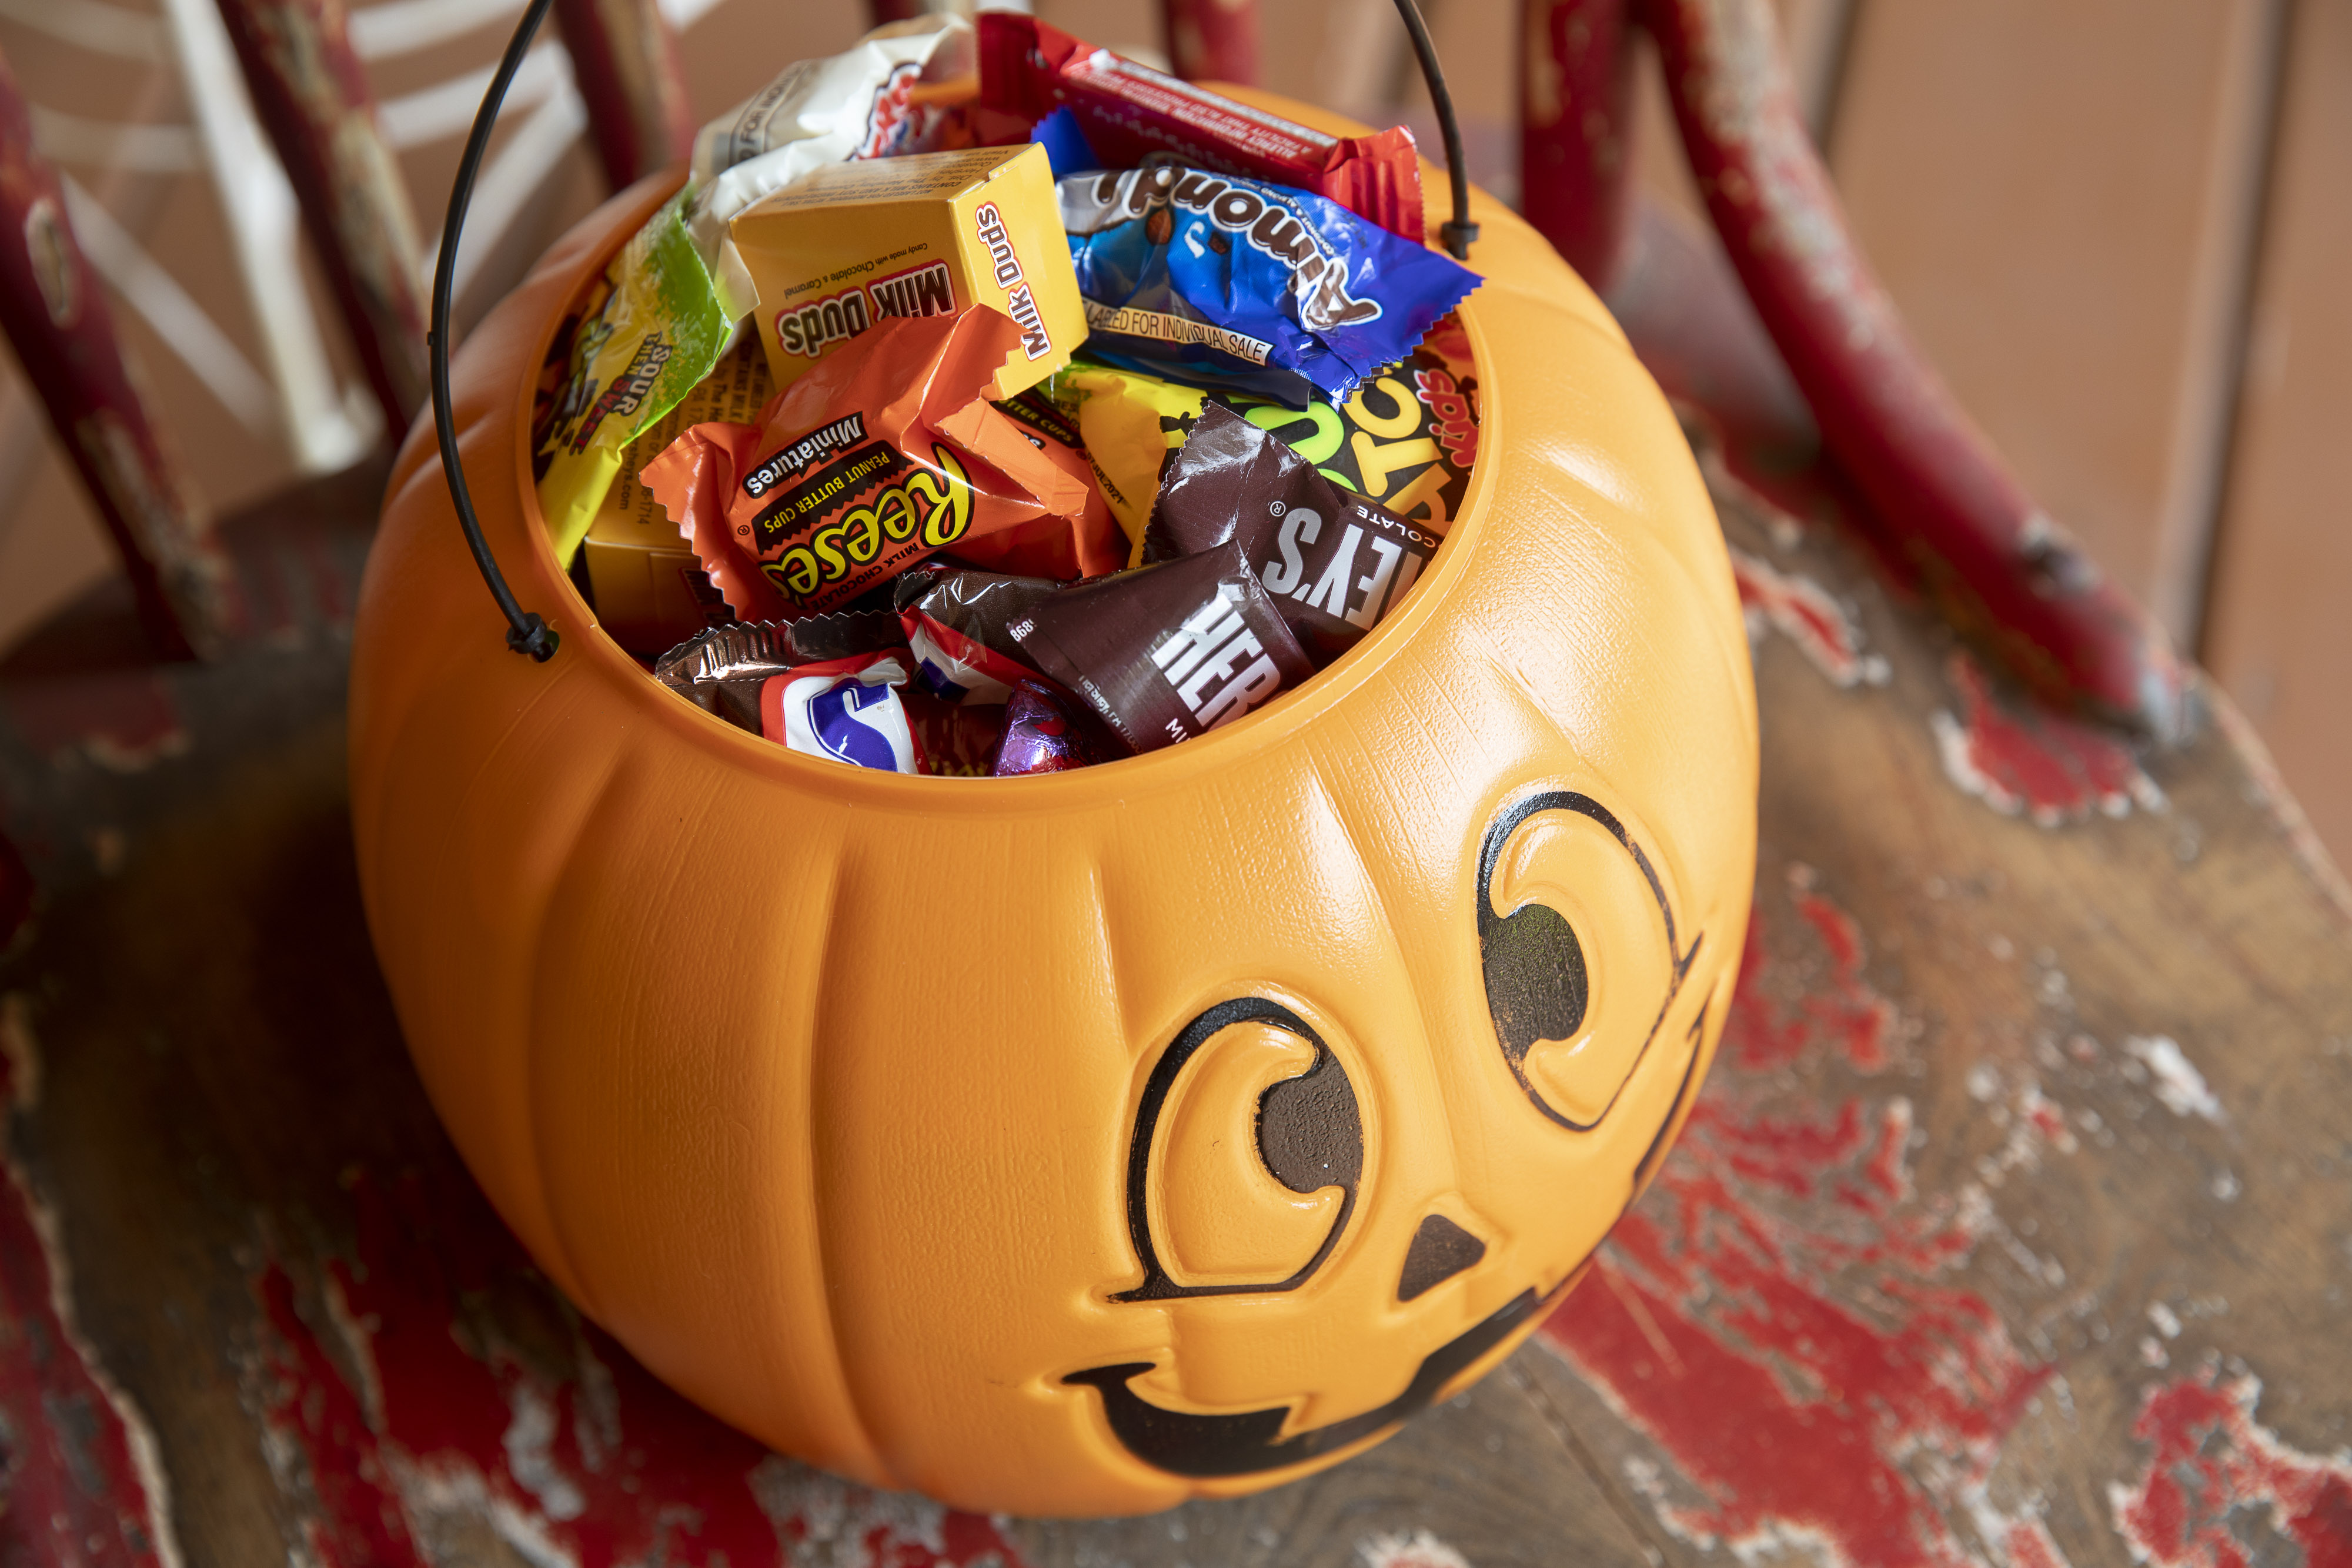 Halloween will cost more this year, but here are 10 candy brands